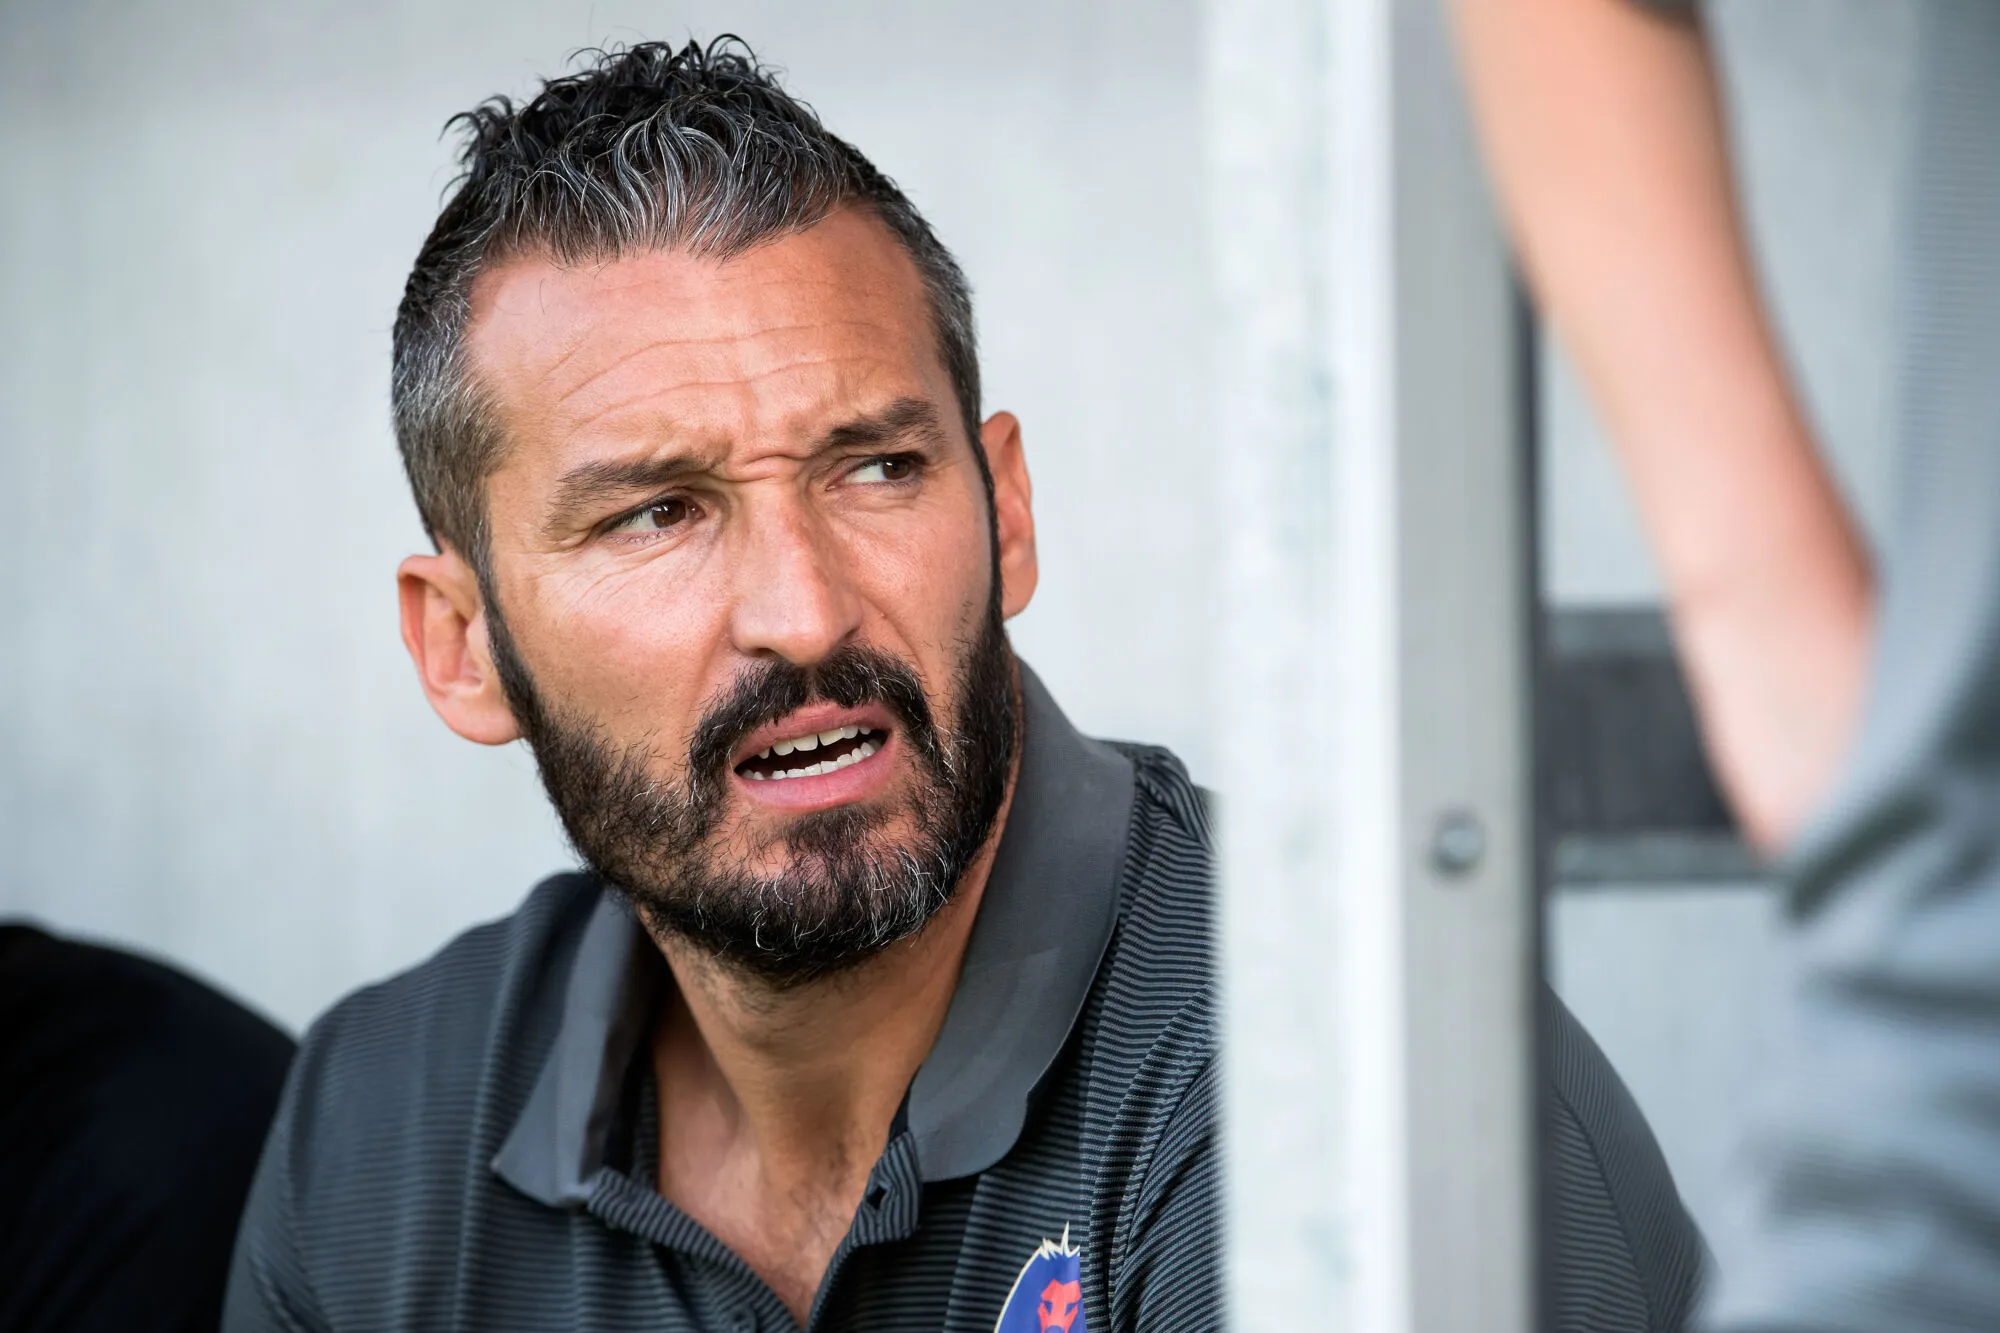 Gianluca Zambrotta  during the friendly match between Delhi Dynamos and Hacken at Goteborg, Sweden on September 09th 2016